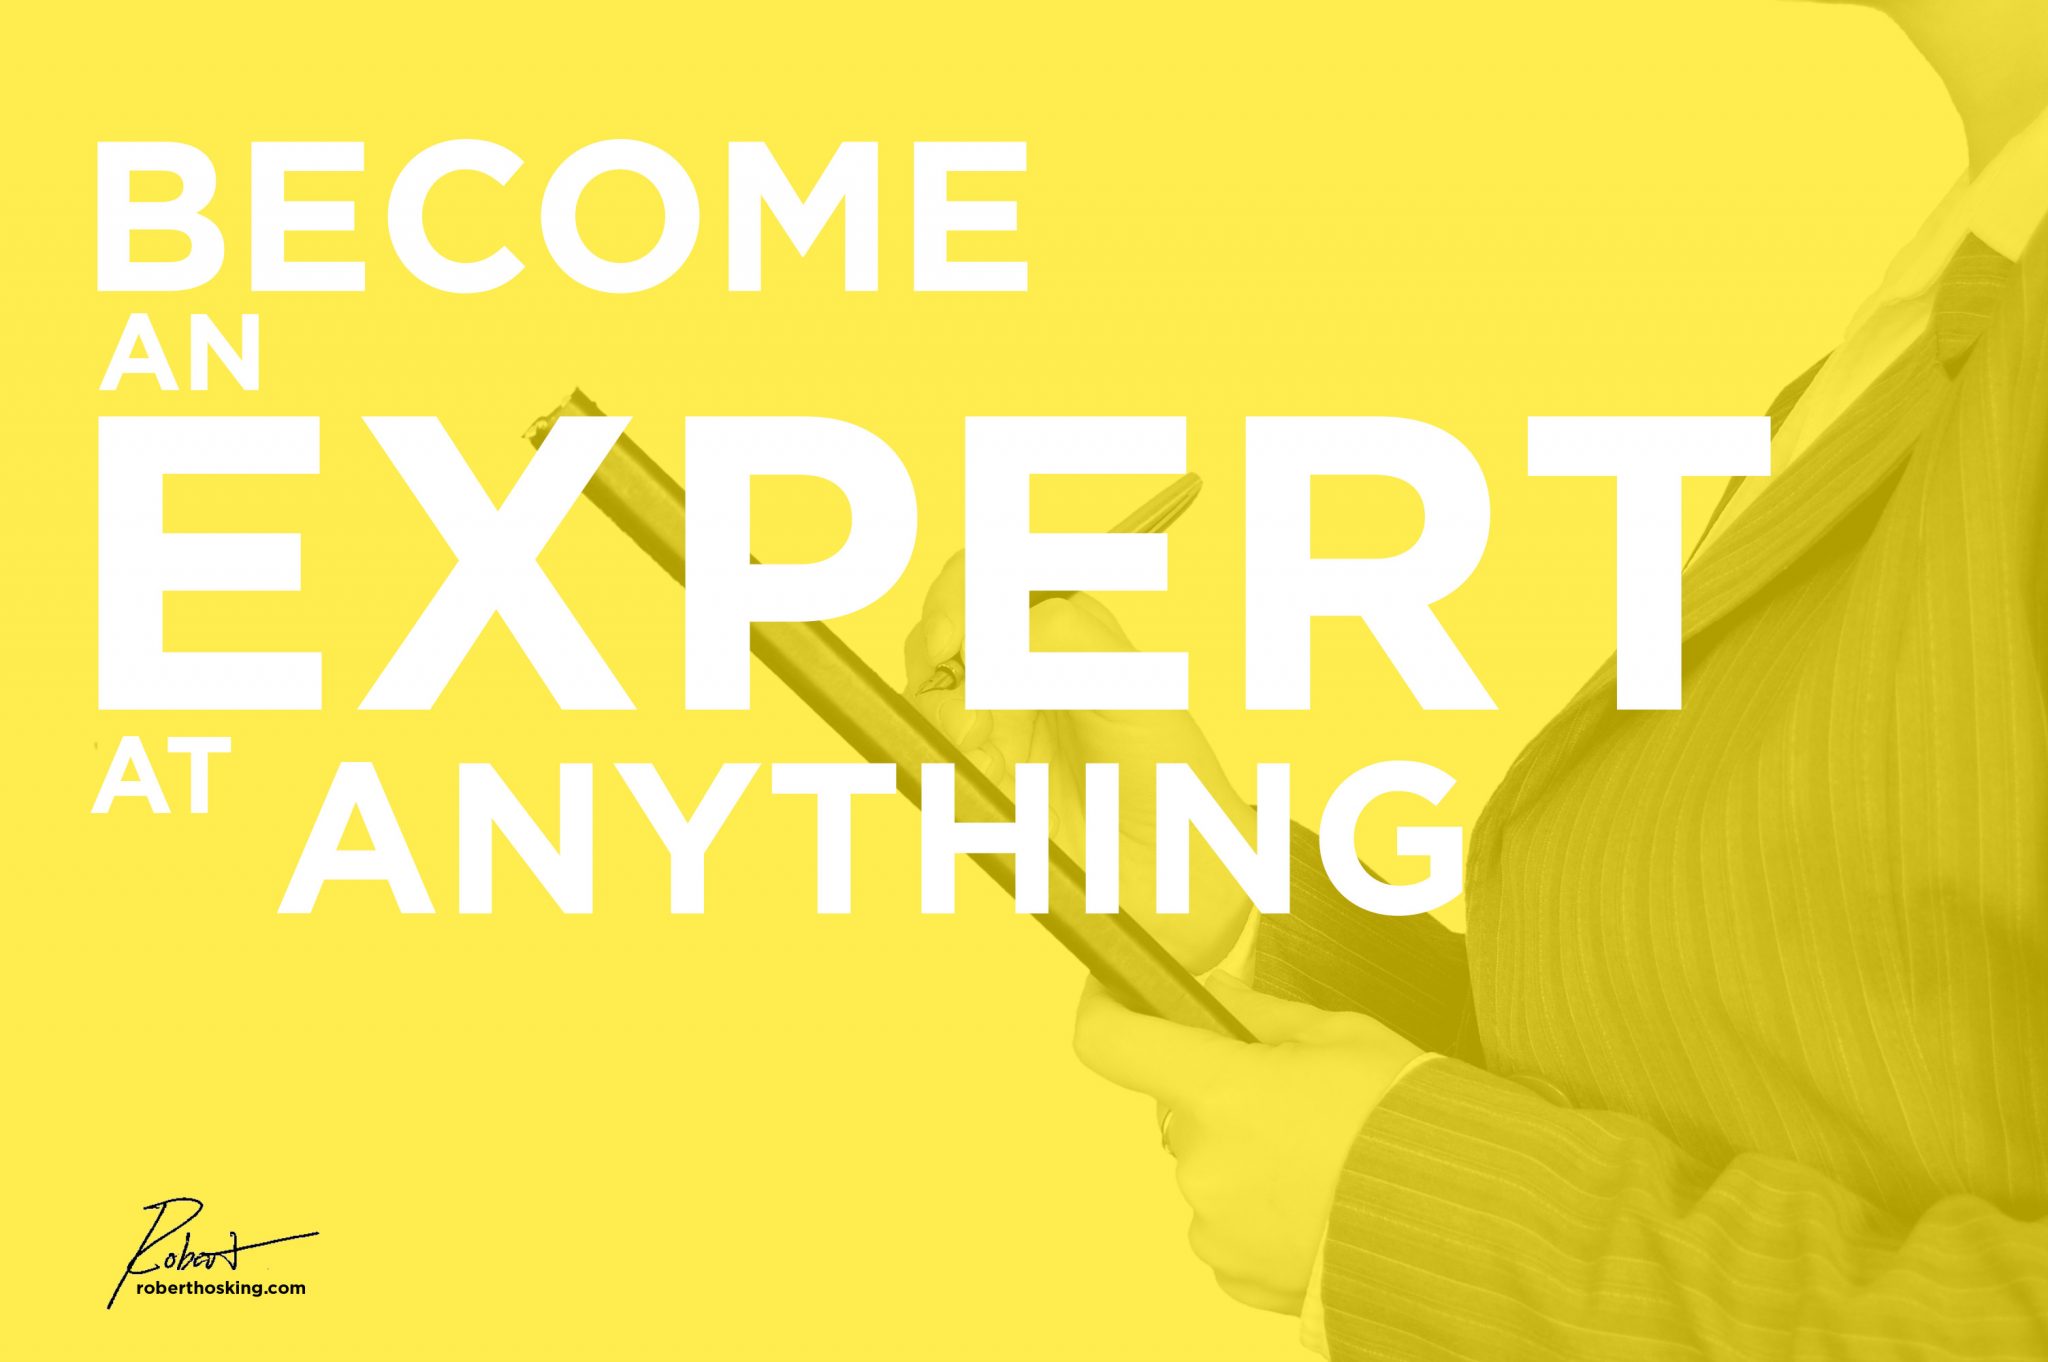 8 Steps to Become an Expert at Anything